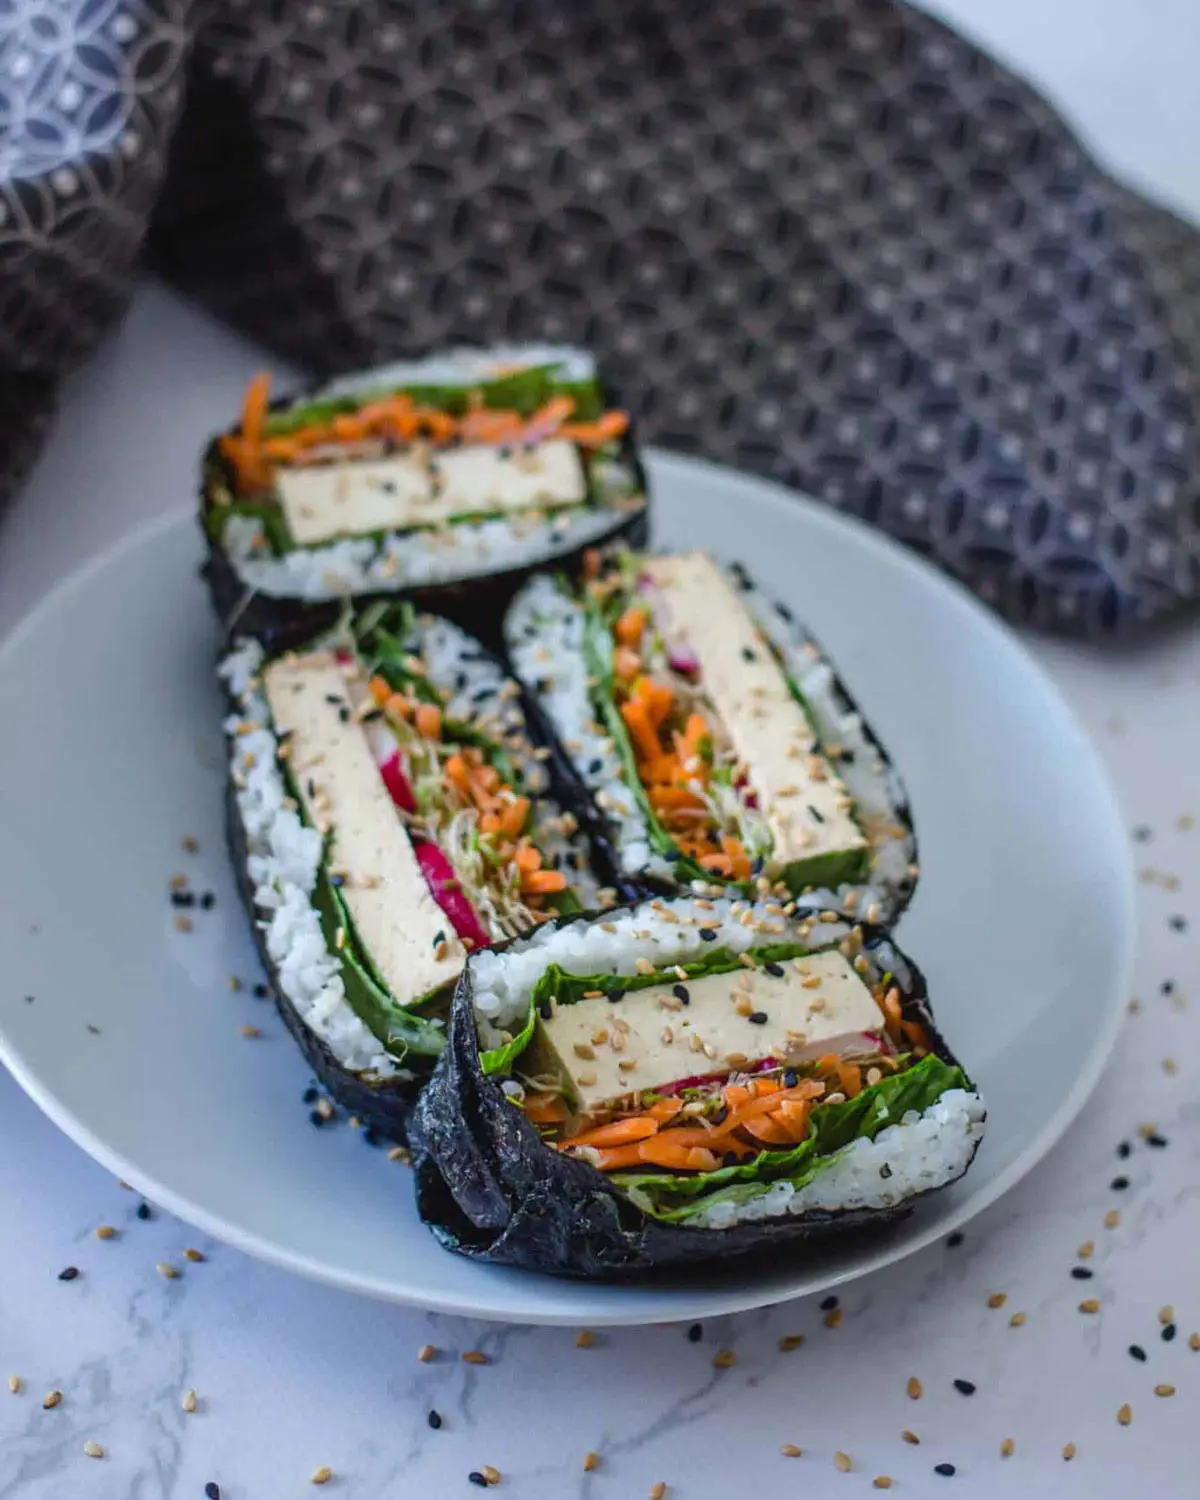 Vegetable and tofu sushi on a plate.